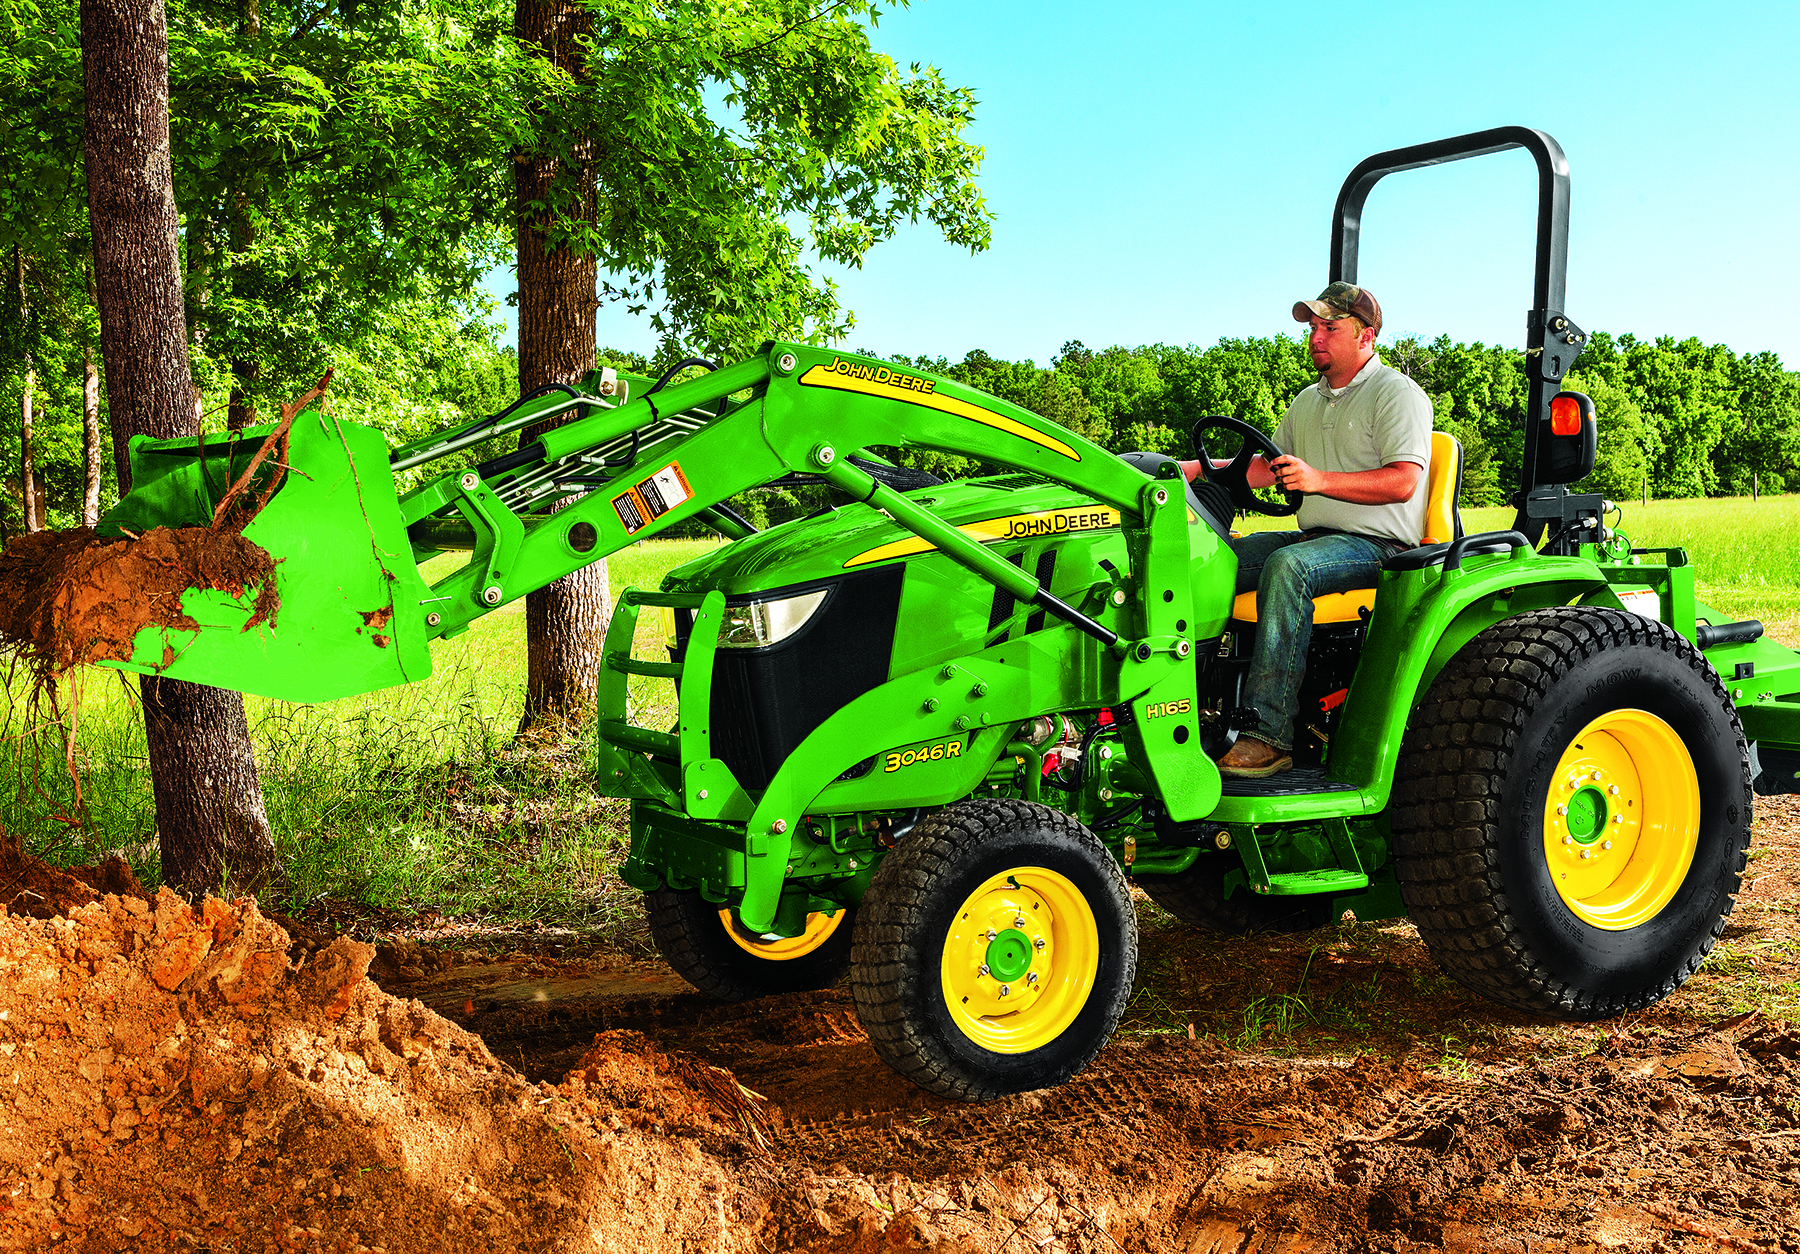 3046R Compact Utility Tractor